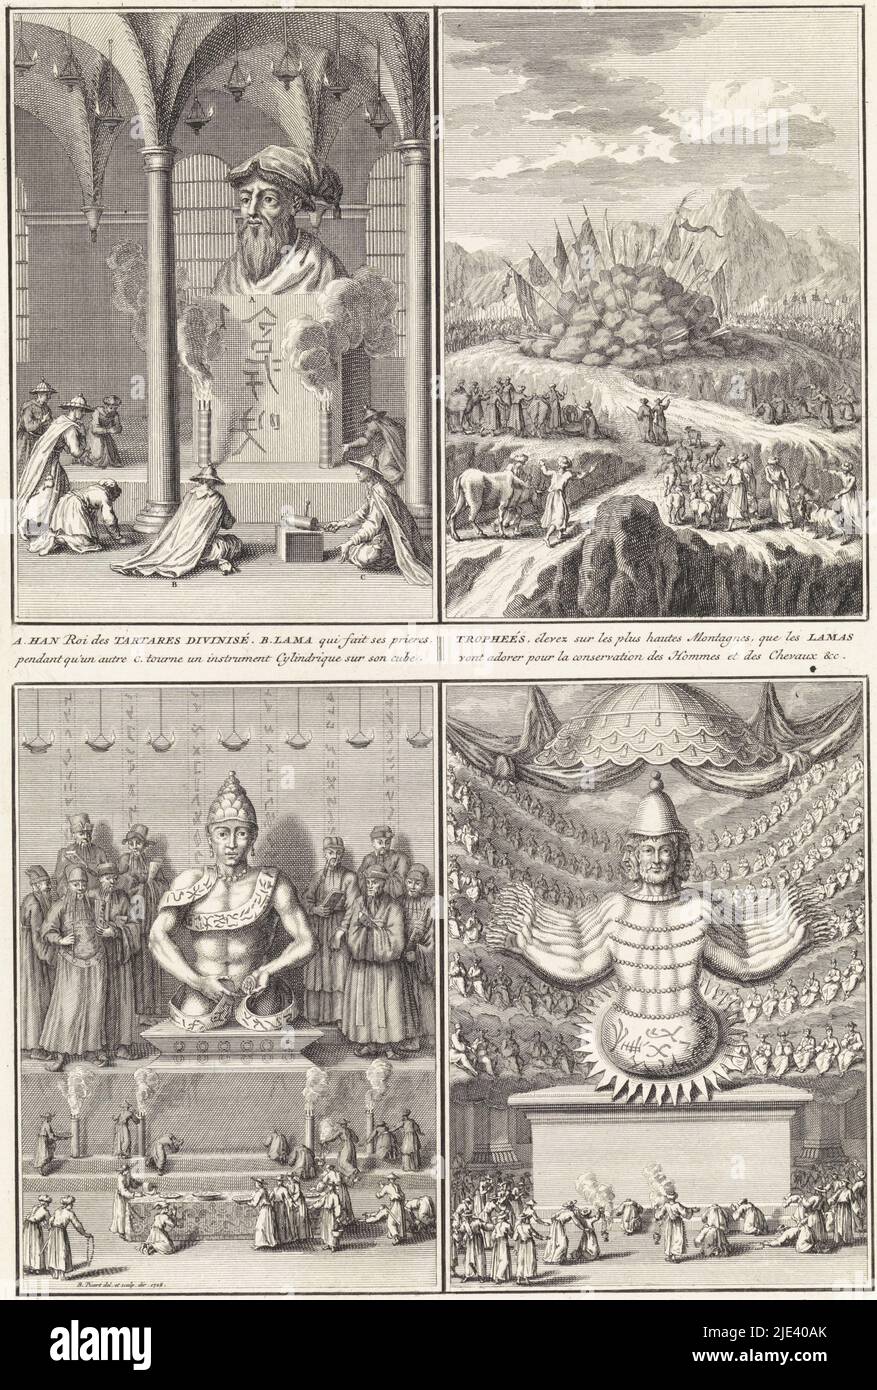 Gods and customs in China and Japan, Bernard Picart (workshop of), after Bernard Picart, 1728, Sheet with four representations of Buddhist gods, Confusius and customs in China. Top left: Image of Han, king of the Tangut people. Before him kneels a lama or priest. Top right: Llamas pray at flags in the mountains. Bottom left: Image and worship of Confusius. Bottom right: The Japanese god Amida., print maker: Bernard Picart, (workshop of), Bernard Picart, (mentioned on object), intermediary draughtsman: Bernard Picart, (mentioned on object), Amsterdam, 1728, paper, etching, engraving, h 340 mm Stock Photo